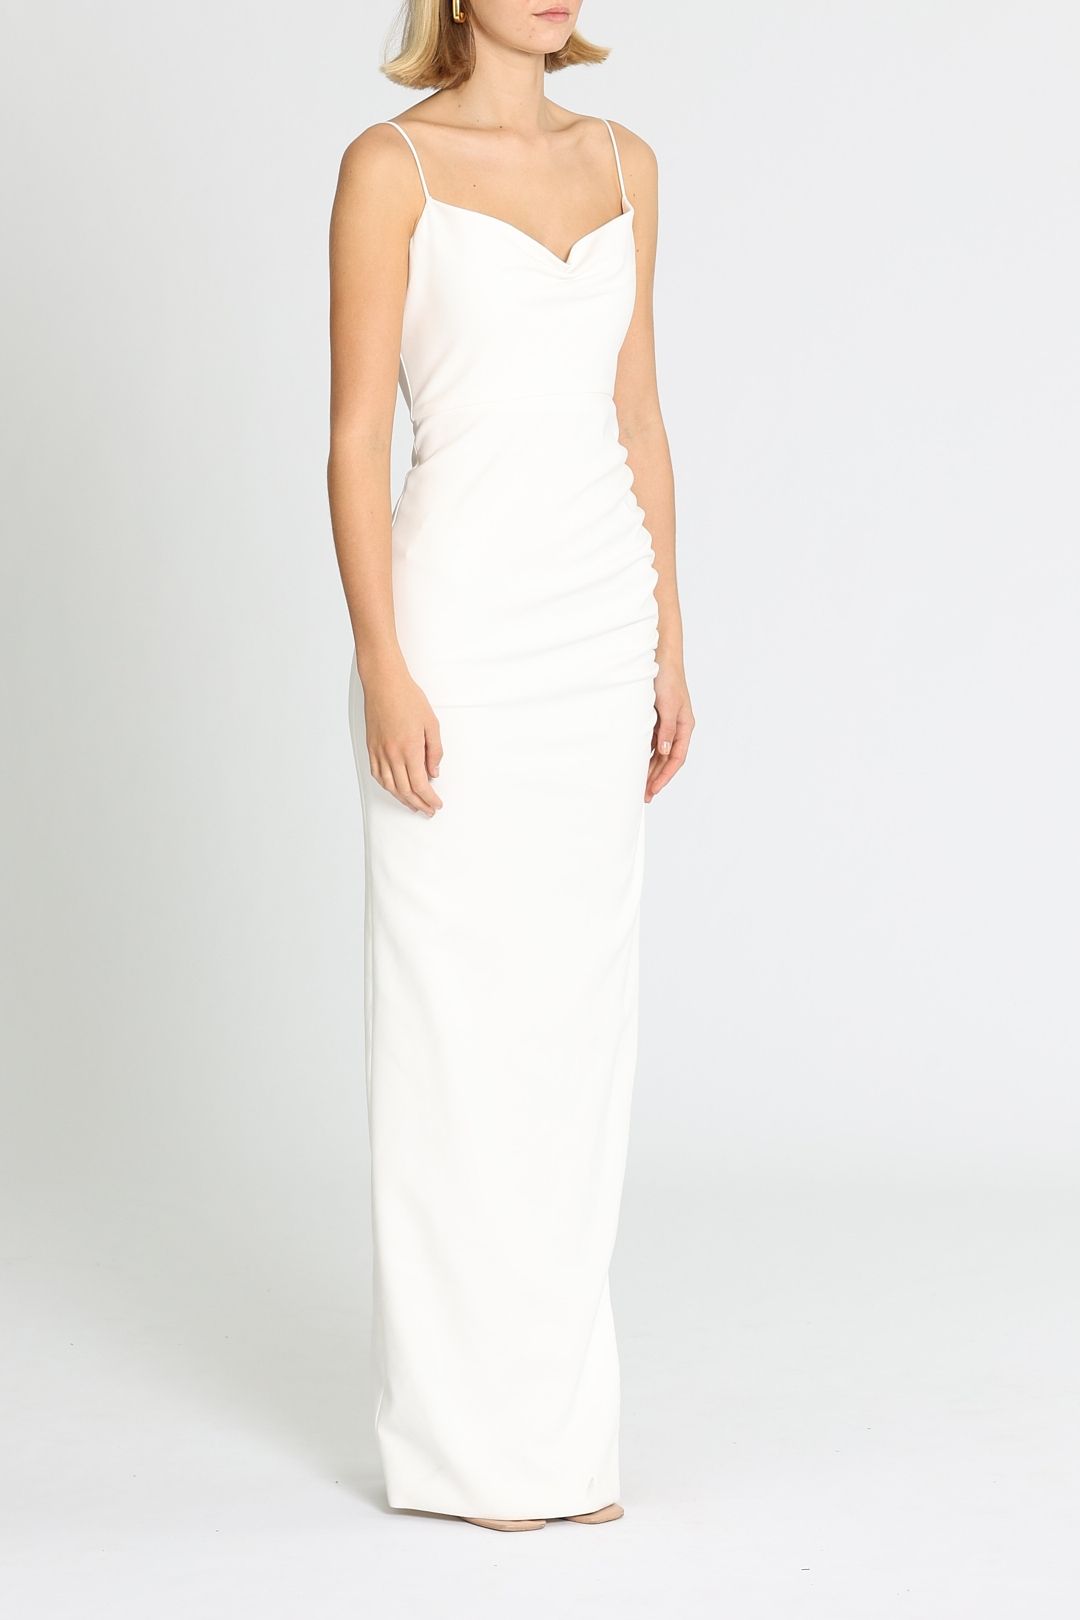 Likely NYC Celida Gown Sweetheart Neckline